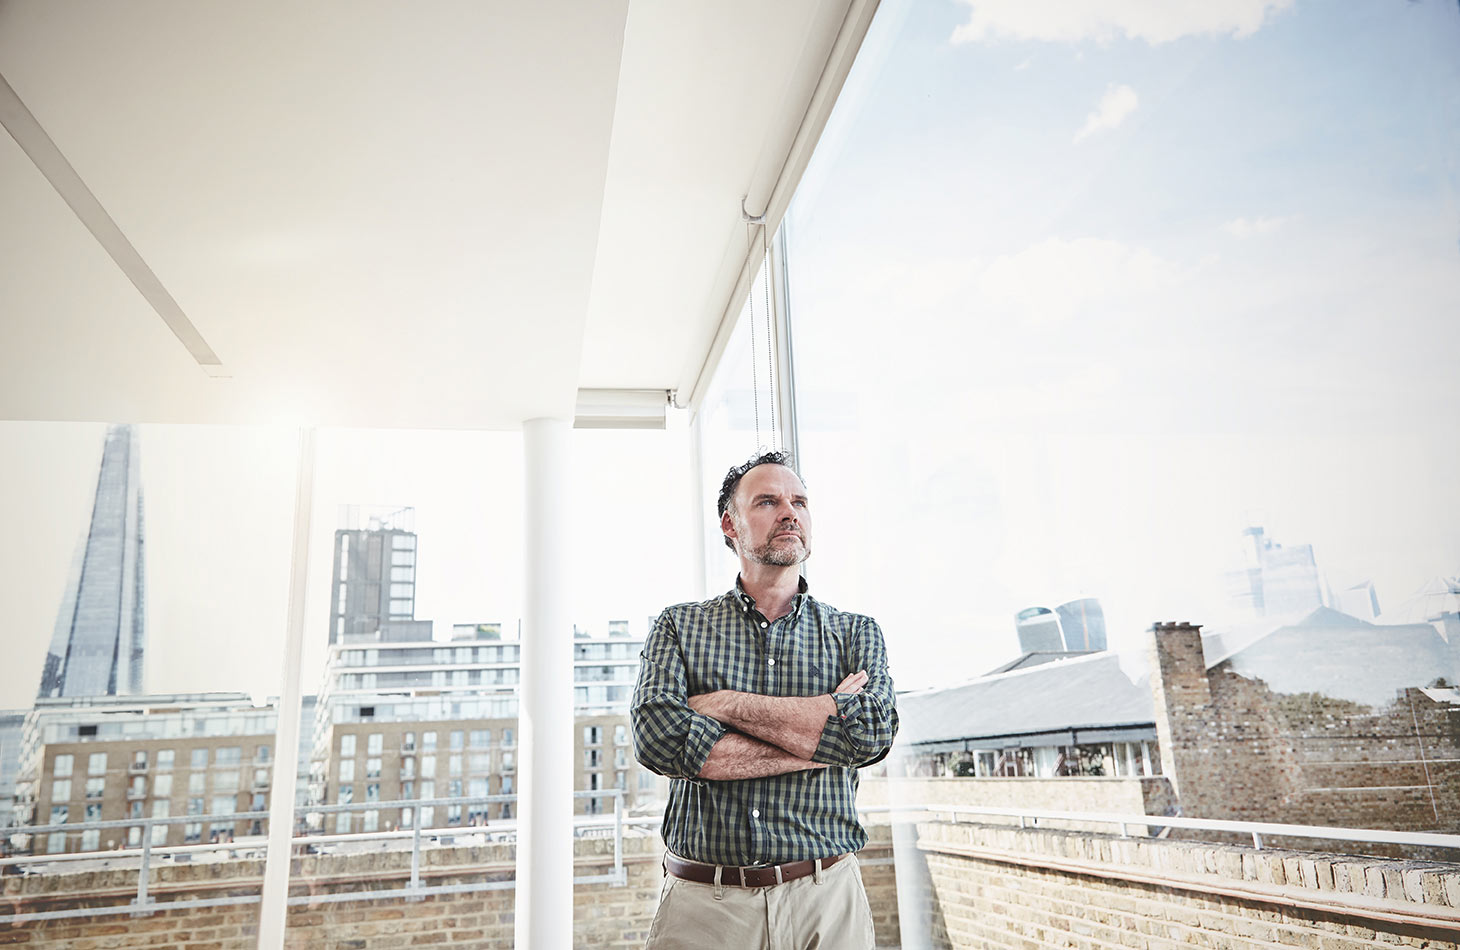 Corporate Photographer london - man standing by office window contemplating.  Business photographer on location. London